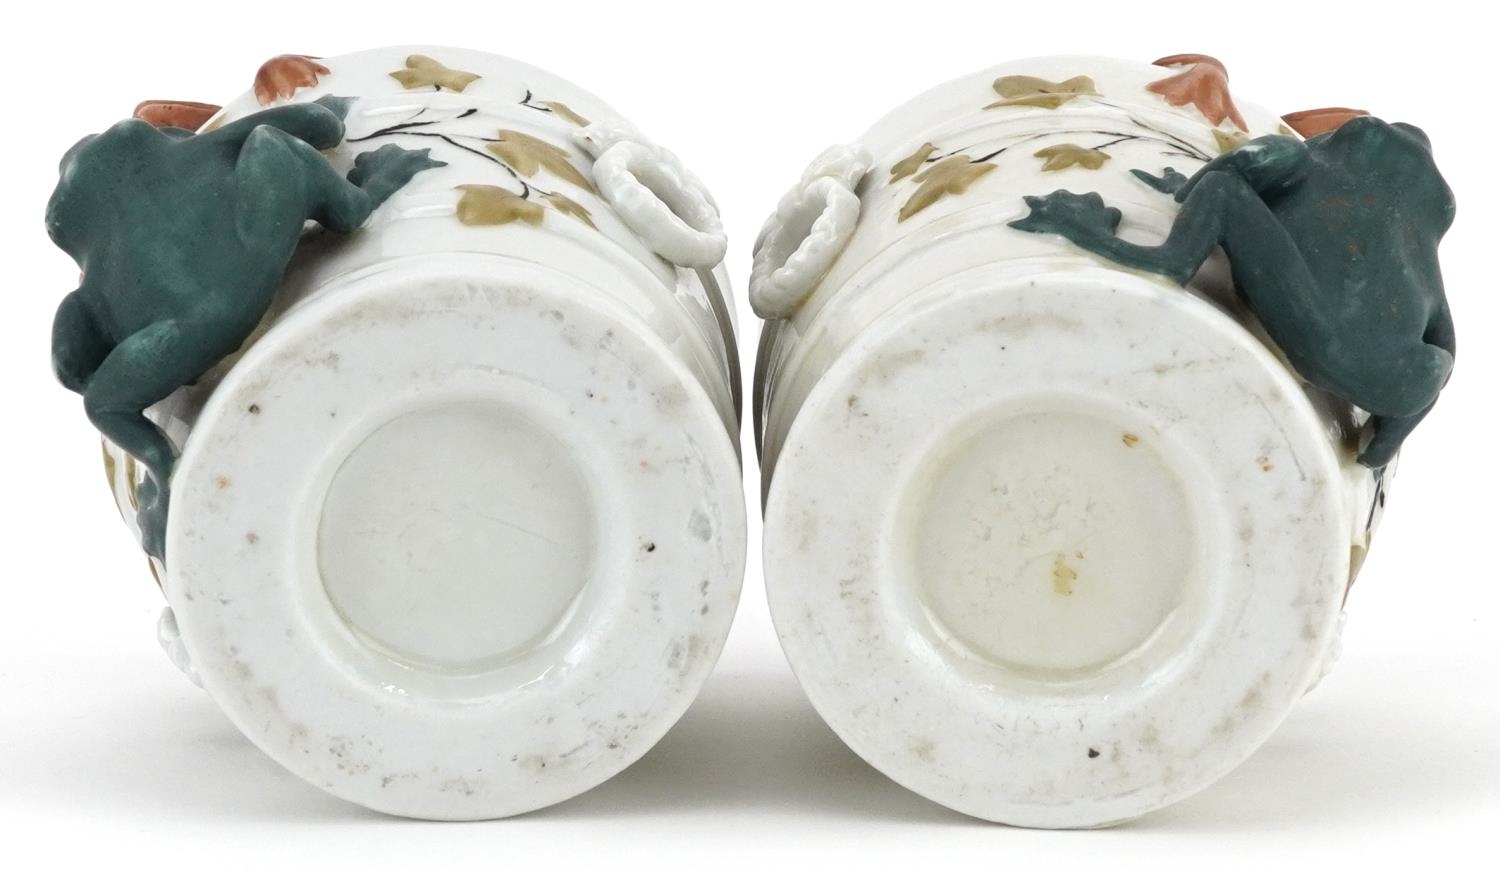 Pair of 19th century continental porcelain comical cache pots in the form of buckets mounted with - Image 4 of 4